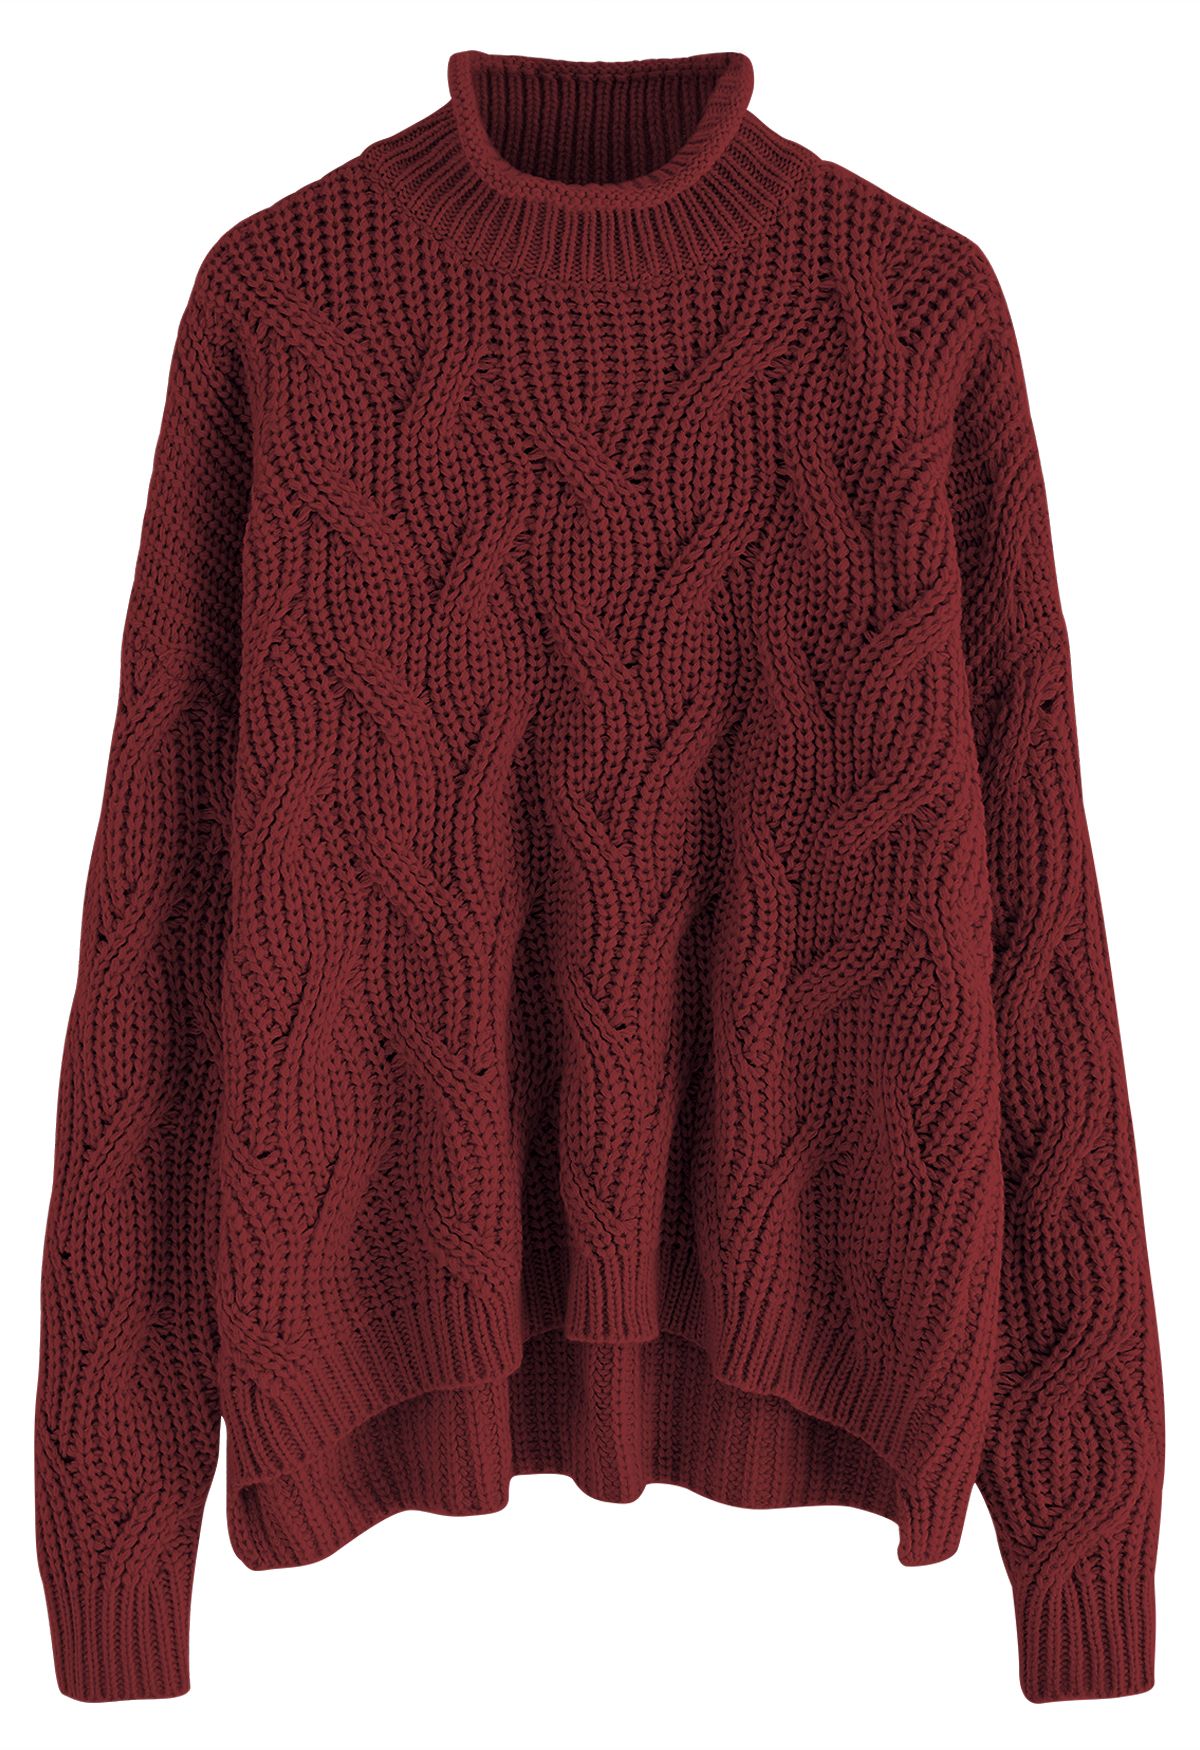 High Neck Hi-Lo Braided Chunky Knit Sweater in Burgundy